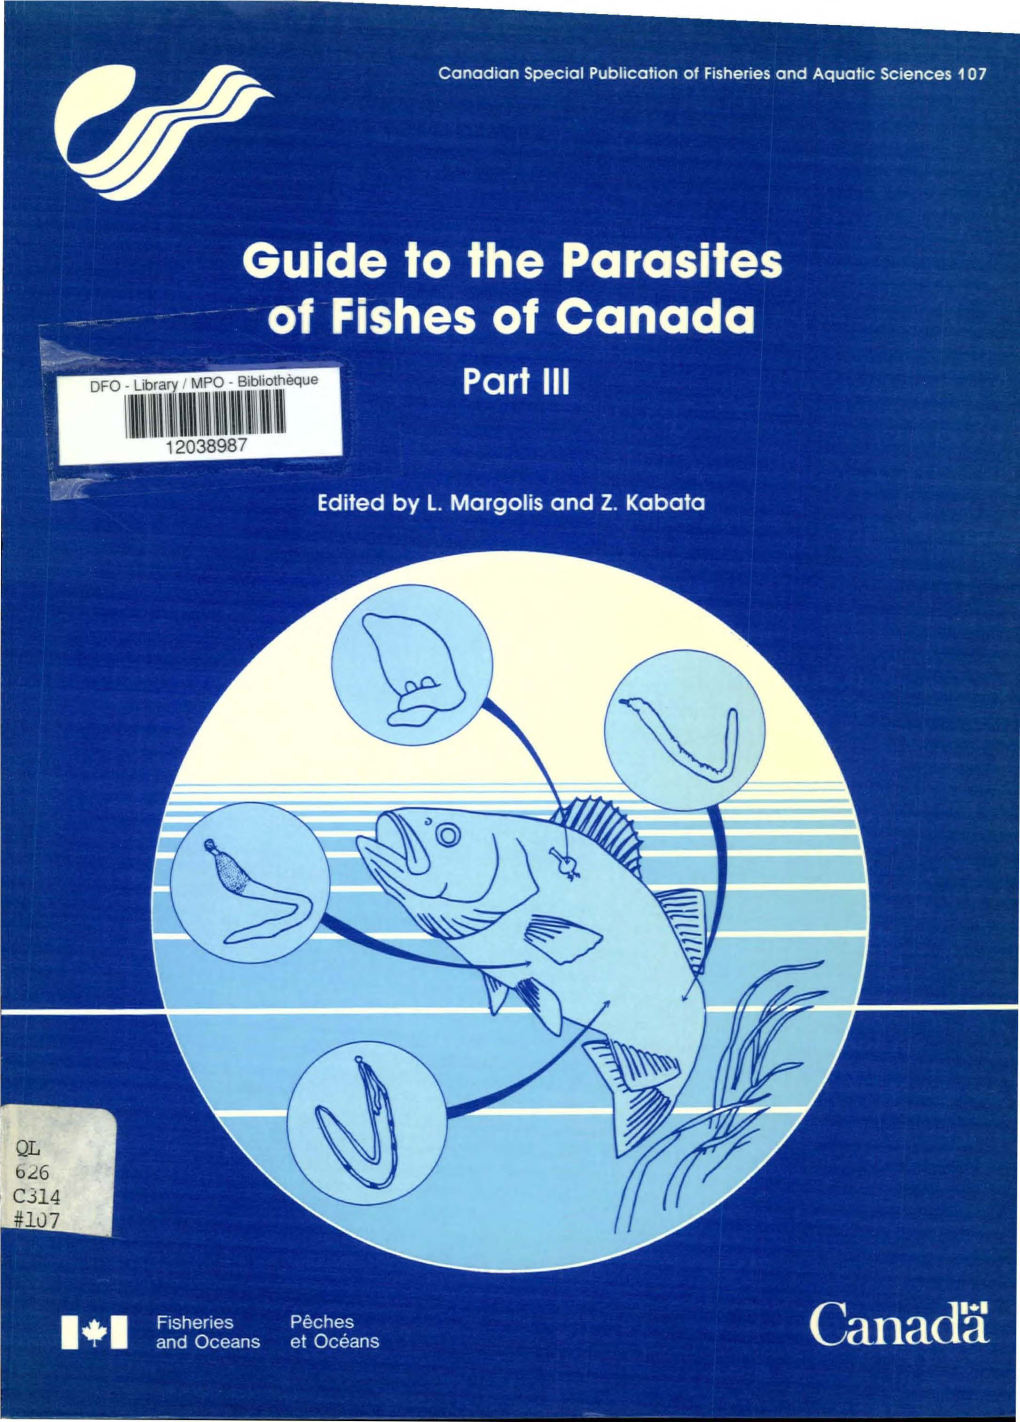 Guide to the Parasites of Fishes of Canada